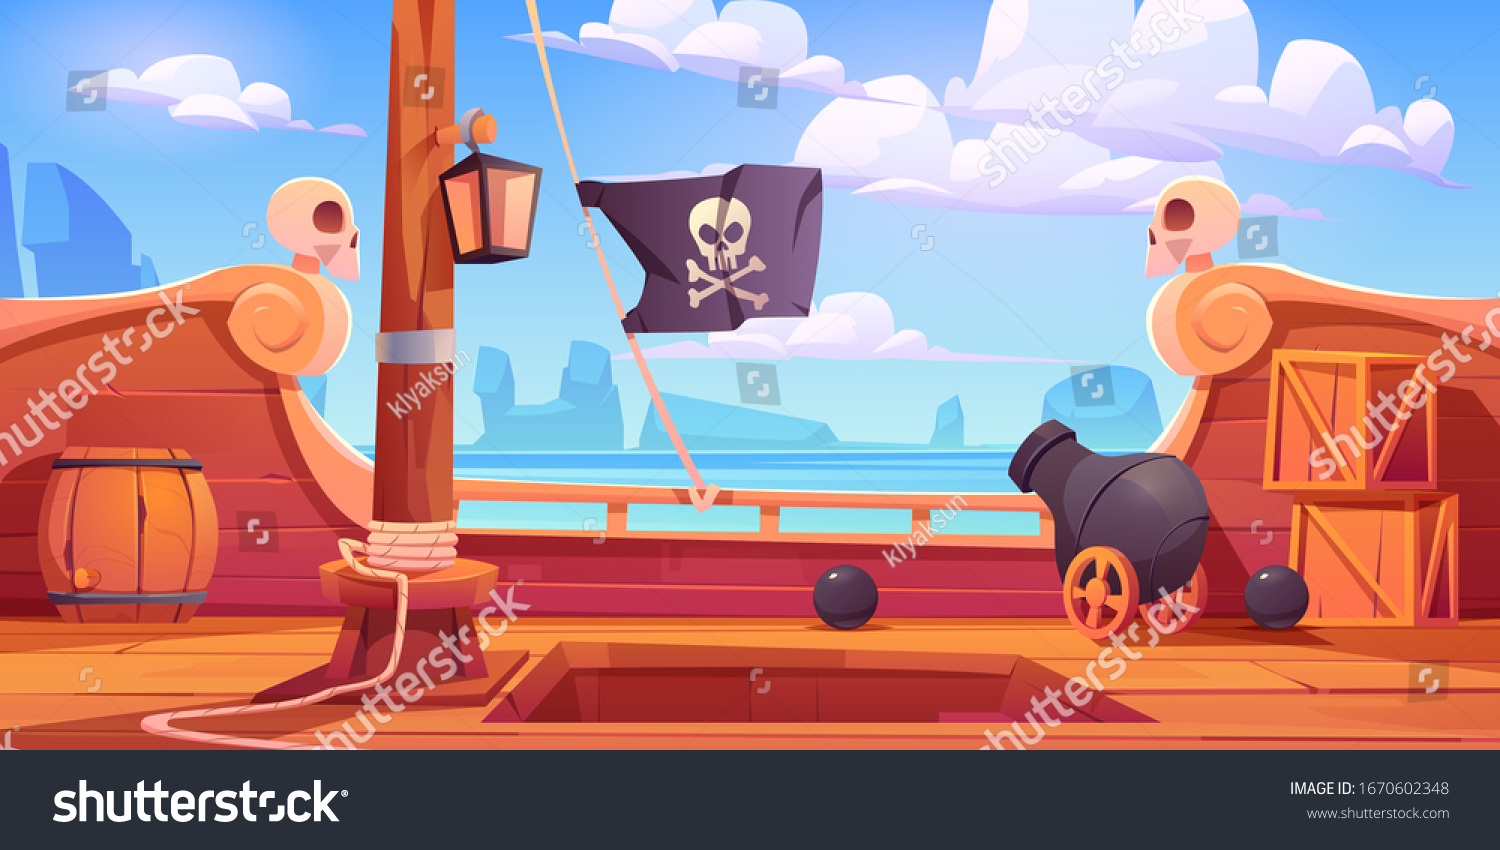 SVG of Pirate ship wooden deck onboard view, boat with cannon, wood boxes and barrel, hold entrance, mast with ropes, lantern and skull buccaneer flag on rocky seascape background cartoon vector illustration svg